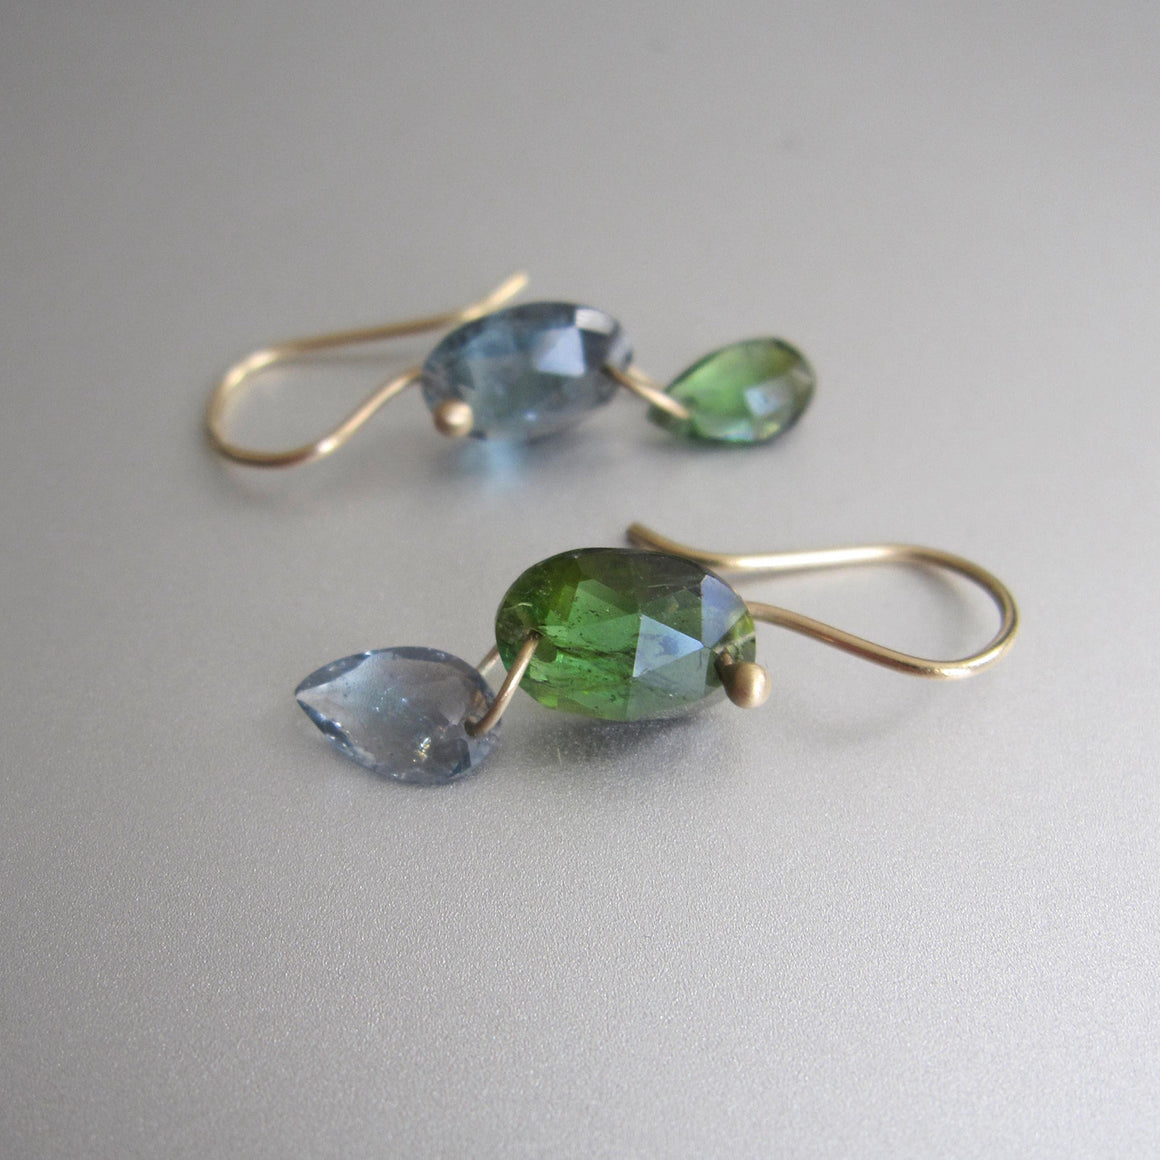 Small Green and Blue Tourmaline Mismatched Double Drops, Solid 14k Gold Drop Earrings